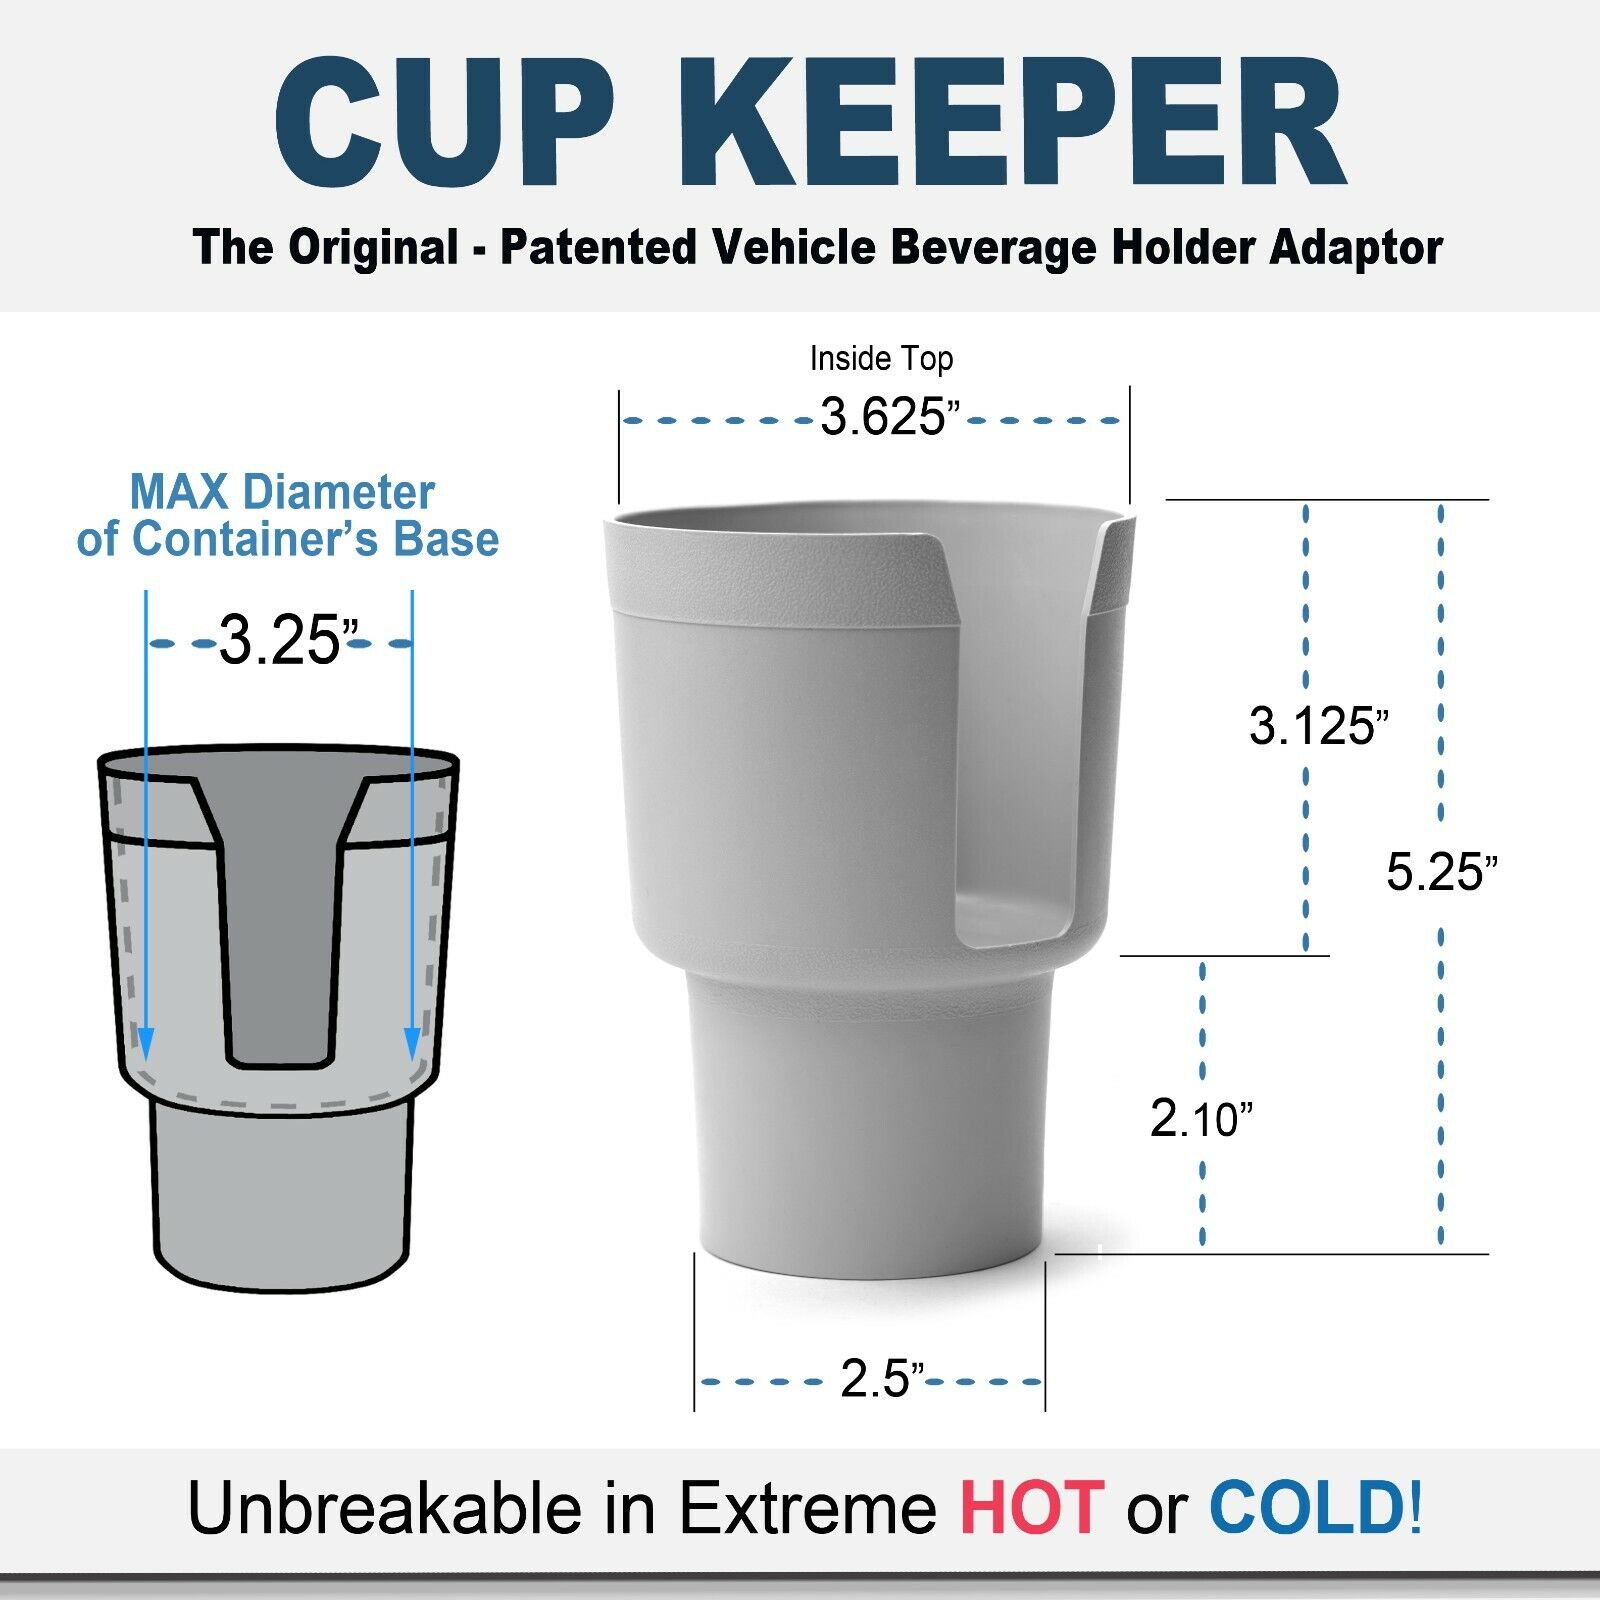 Car Cup Holder Size: Maximize Your Beverage Space!